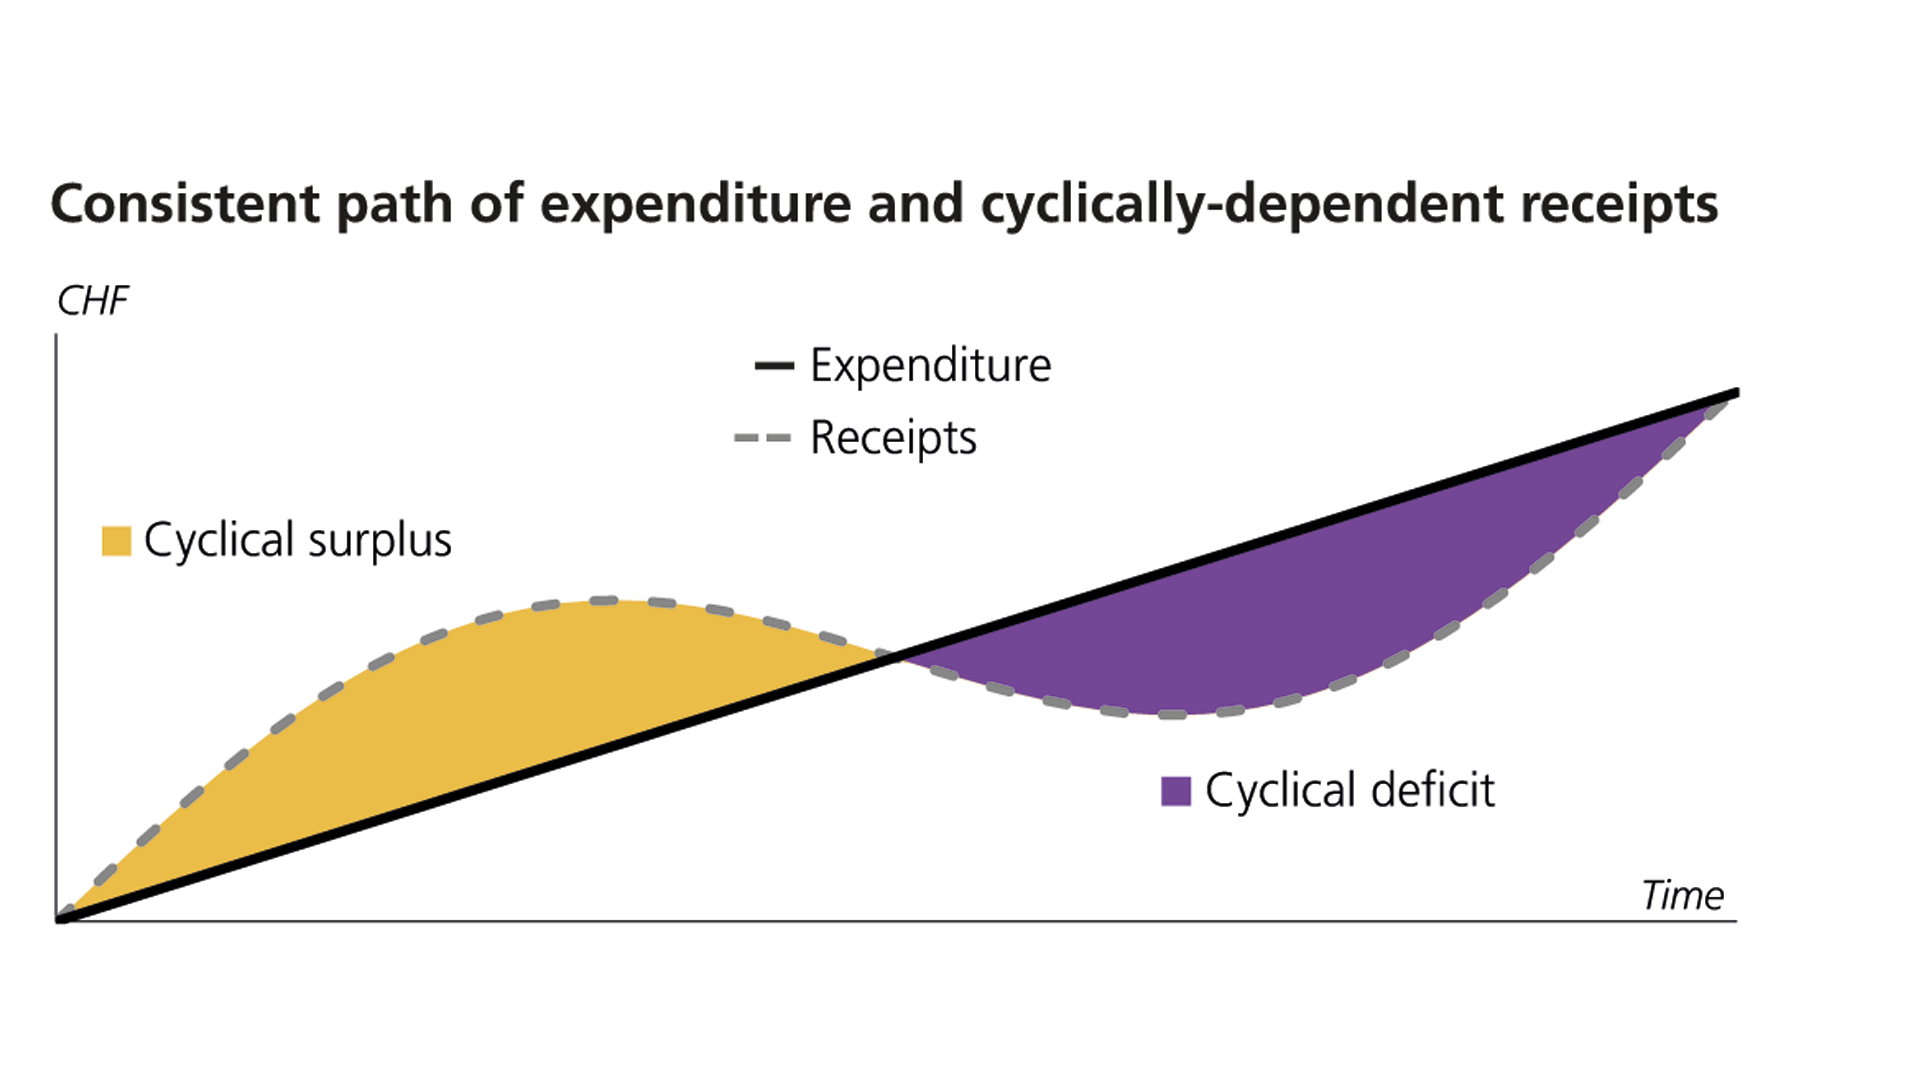 Consistent path of expenditure and cyclically-dependent receipts